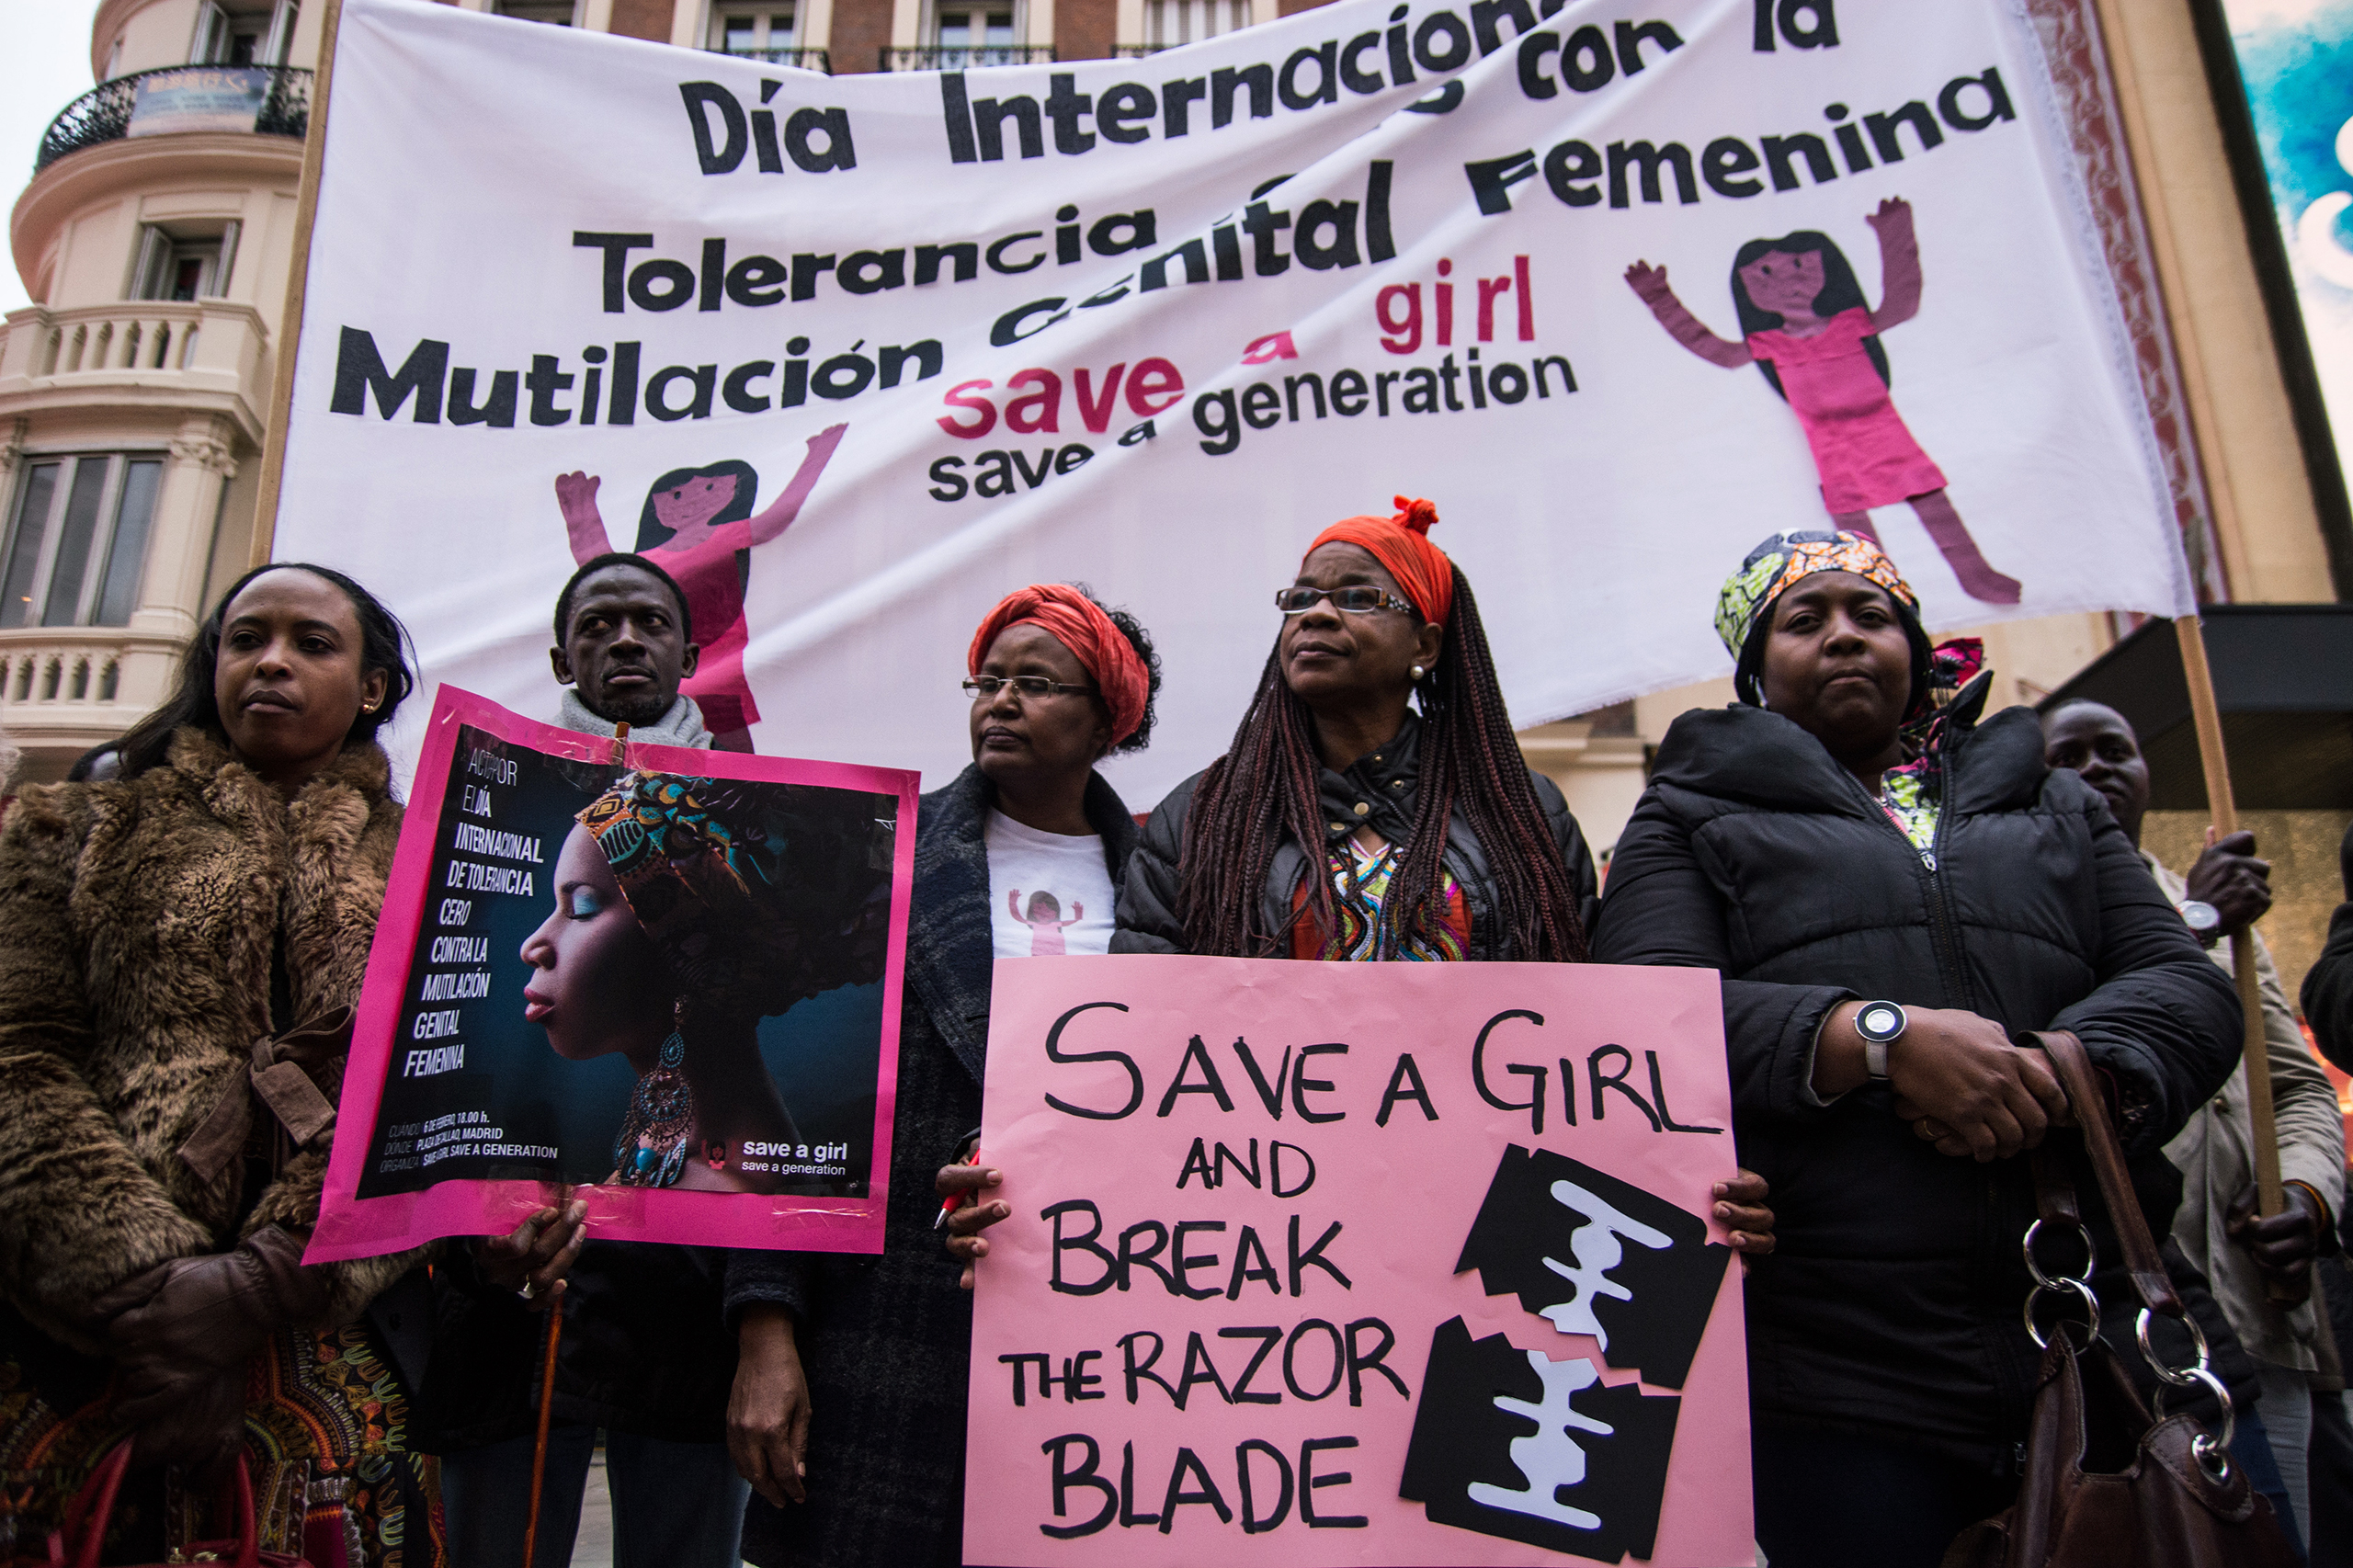 People protest during a rally marking International Day of Zero Tolerance to Female Genital Mutilation in Madrid on Feb. 6, 2016. (Marcos del Mazo—Pacific Press/LightRocket/Getty Images)